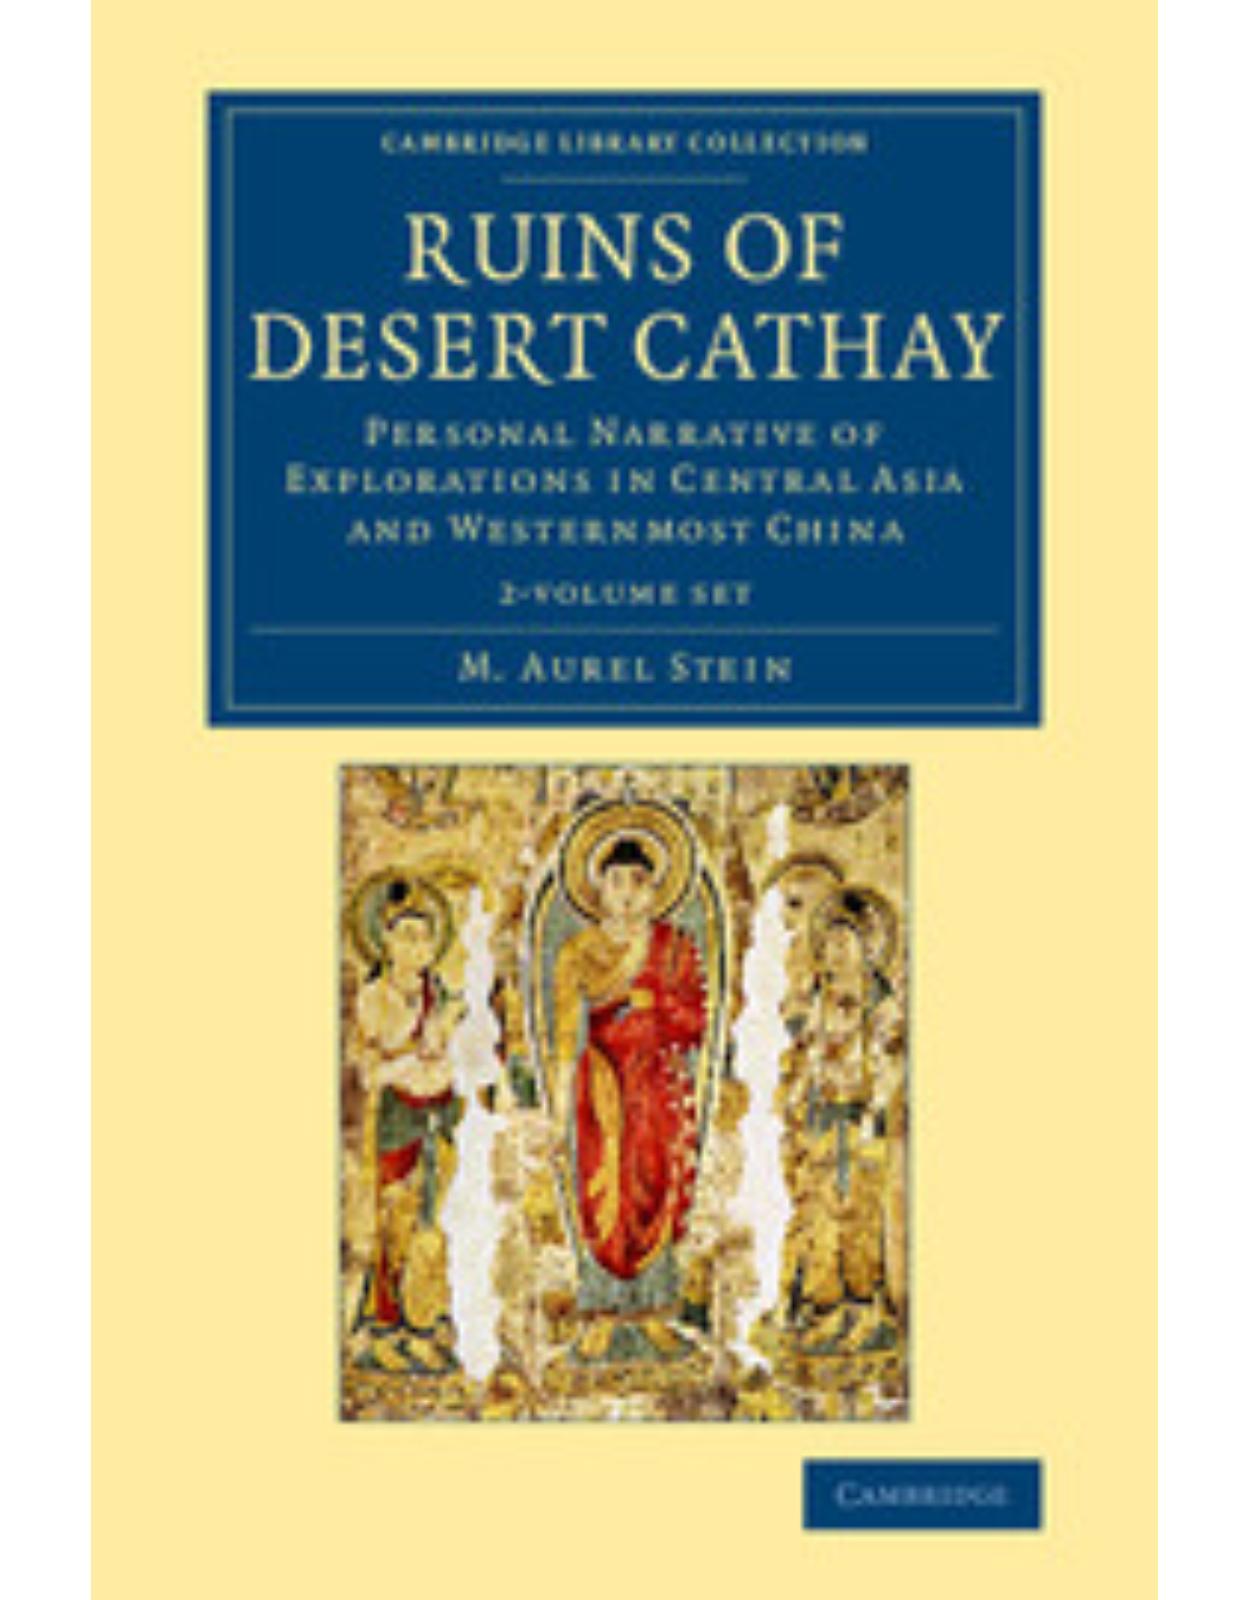 Ruins of Desert Cathay 2 Volume Set: Personal Narrative of Explorations in Central Asia and Westernmost China (Cambridge Library Collection - Archaeology)